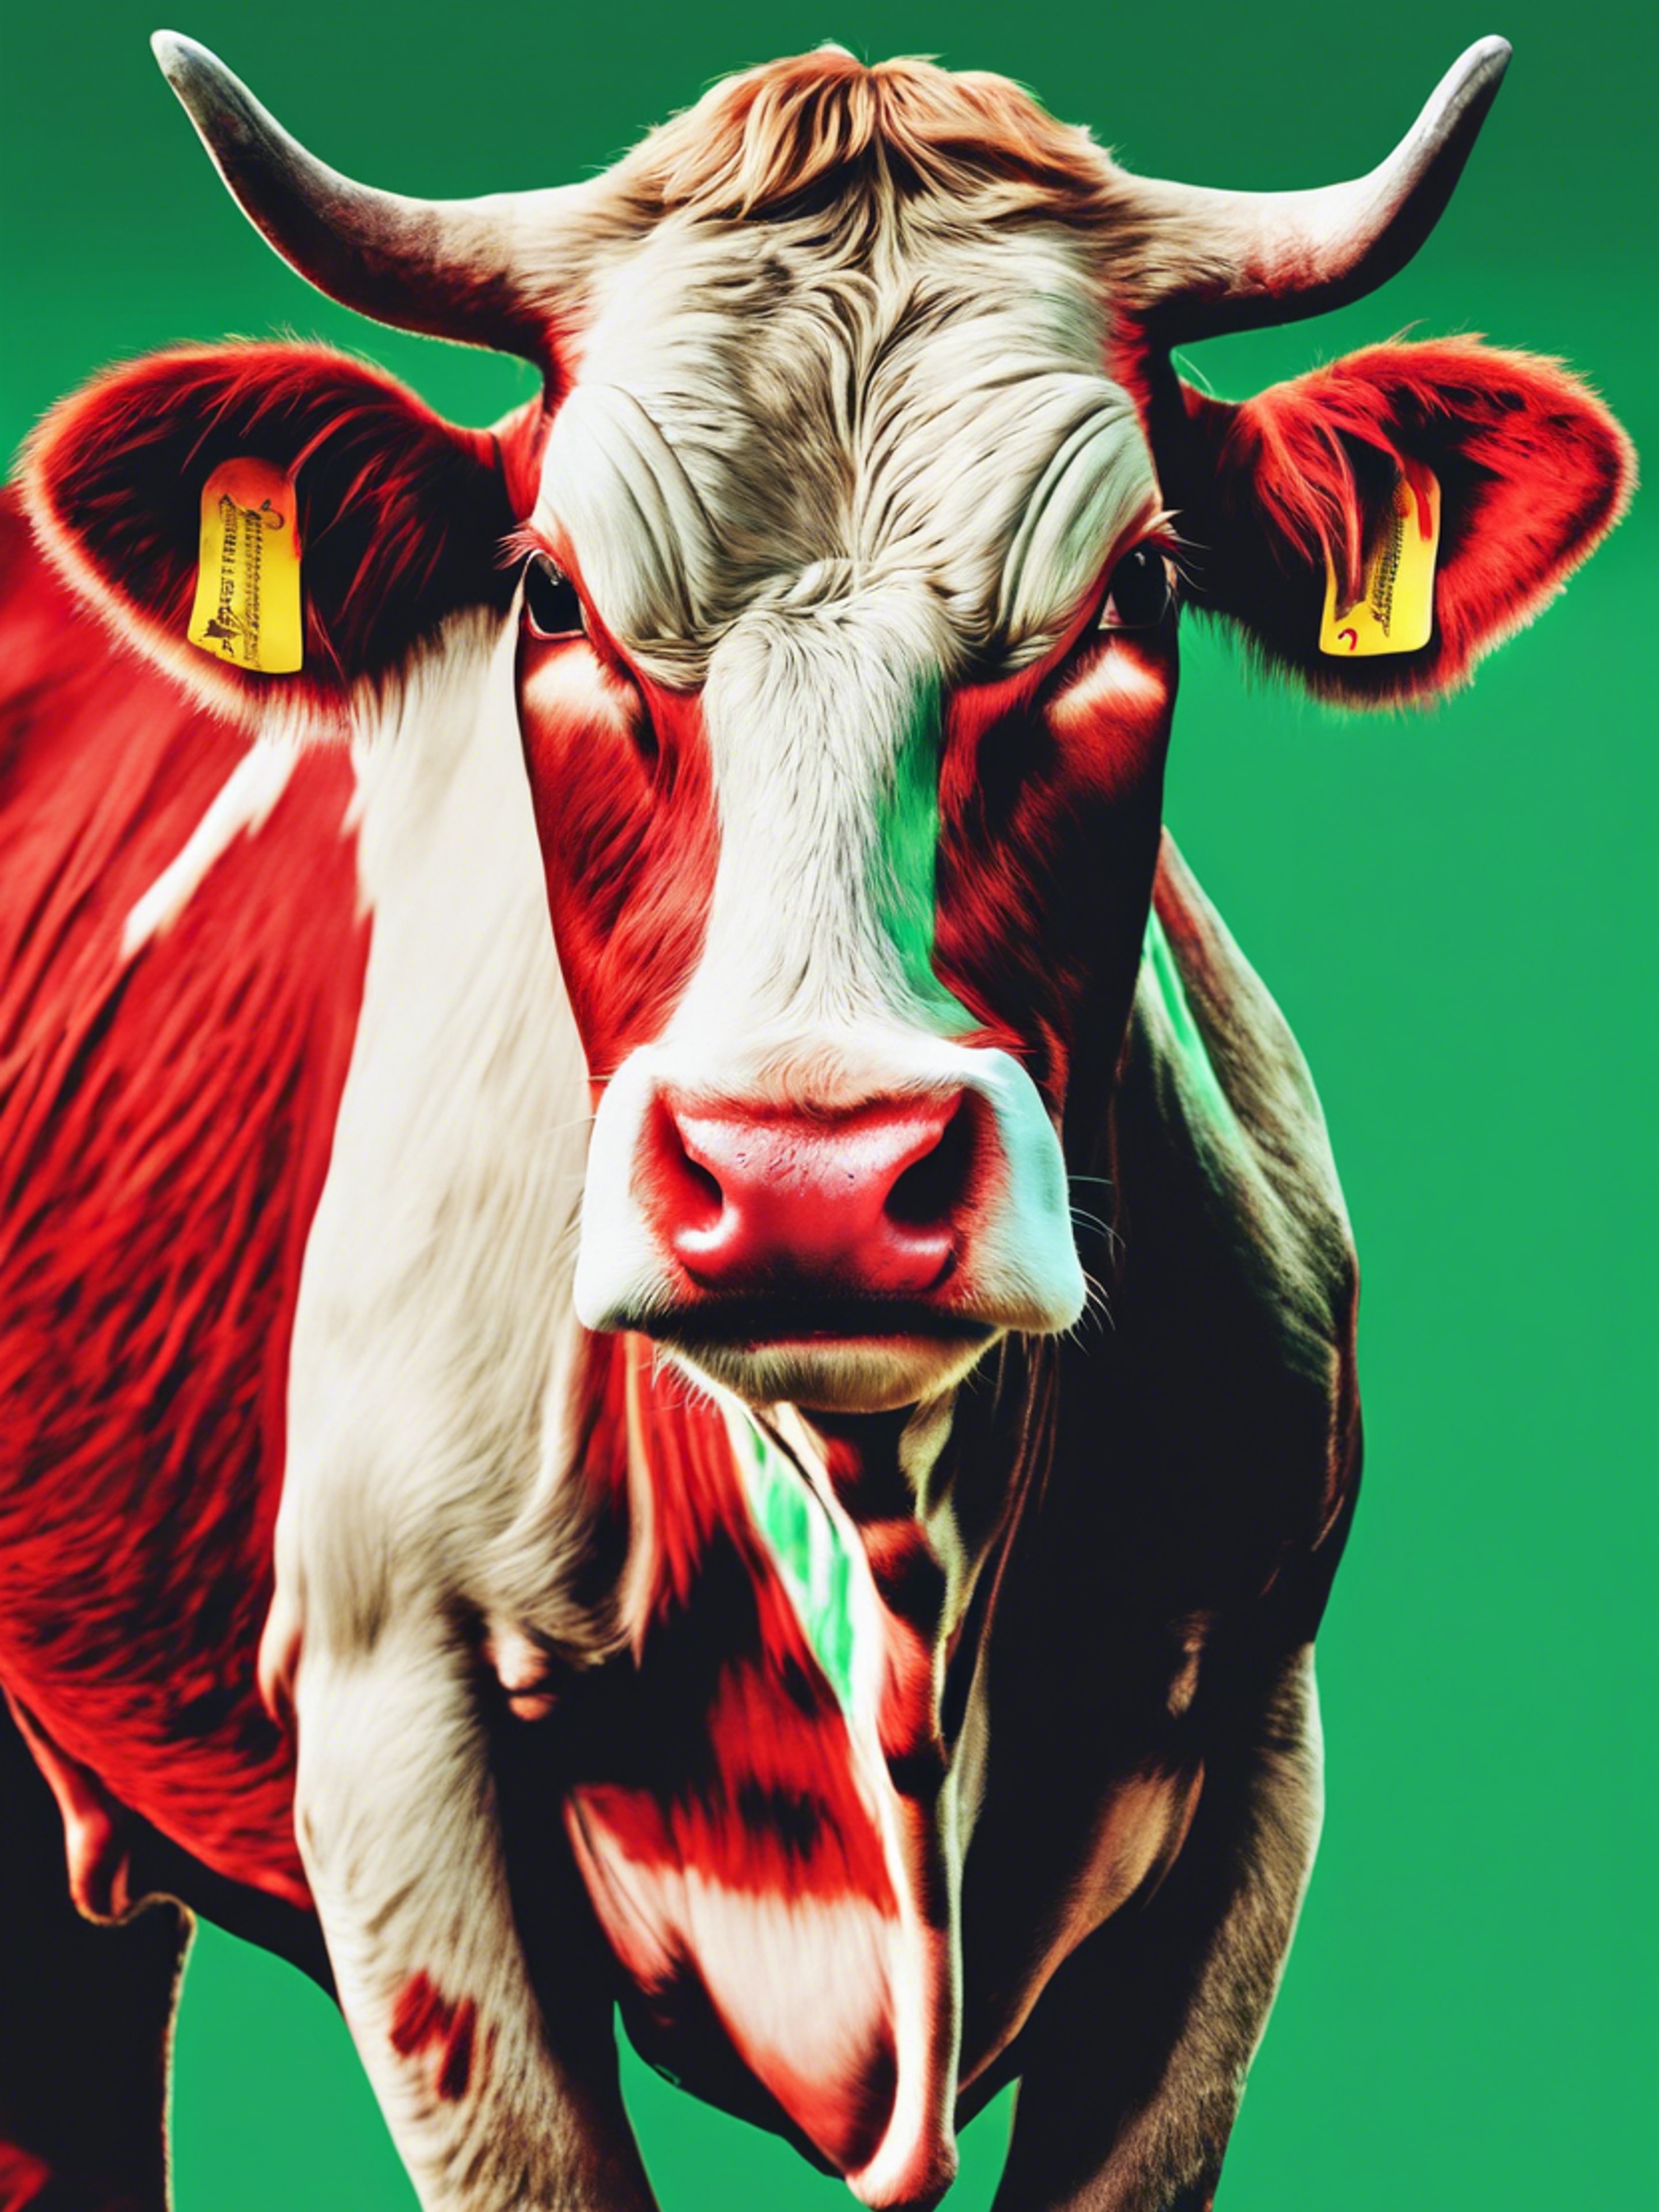 Pop-art style cow print in a palette of red and green. Hình nền[5b65906f2b9649418c8c]